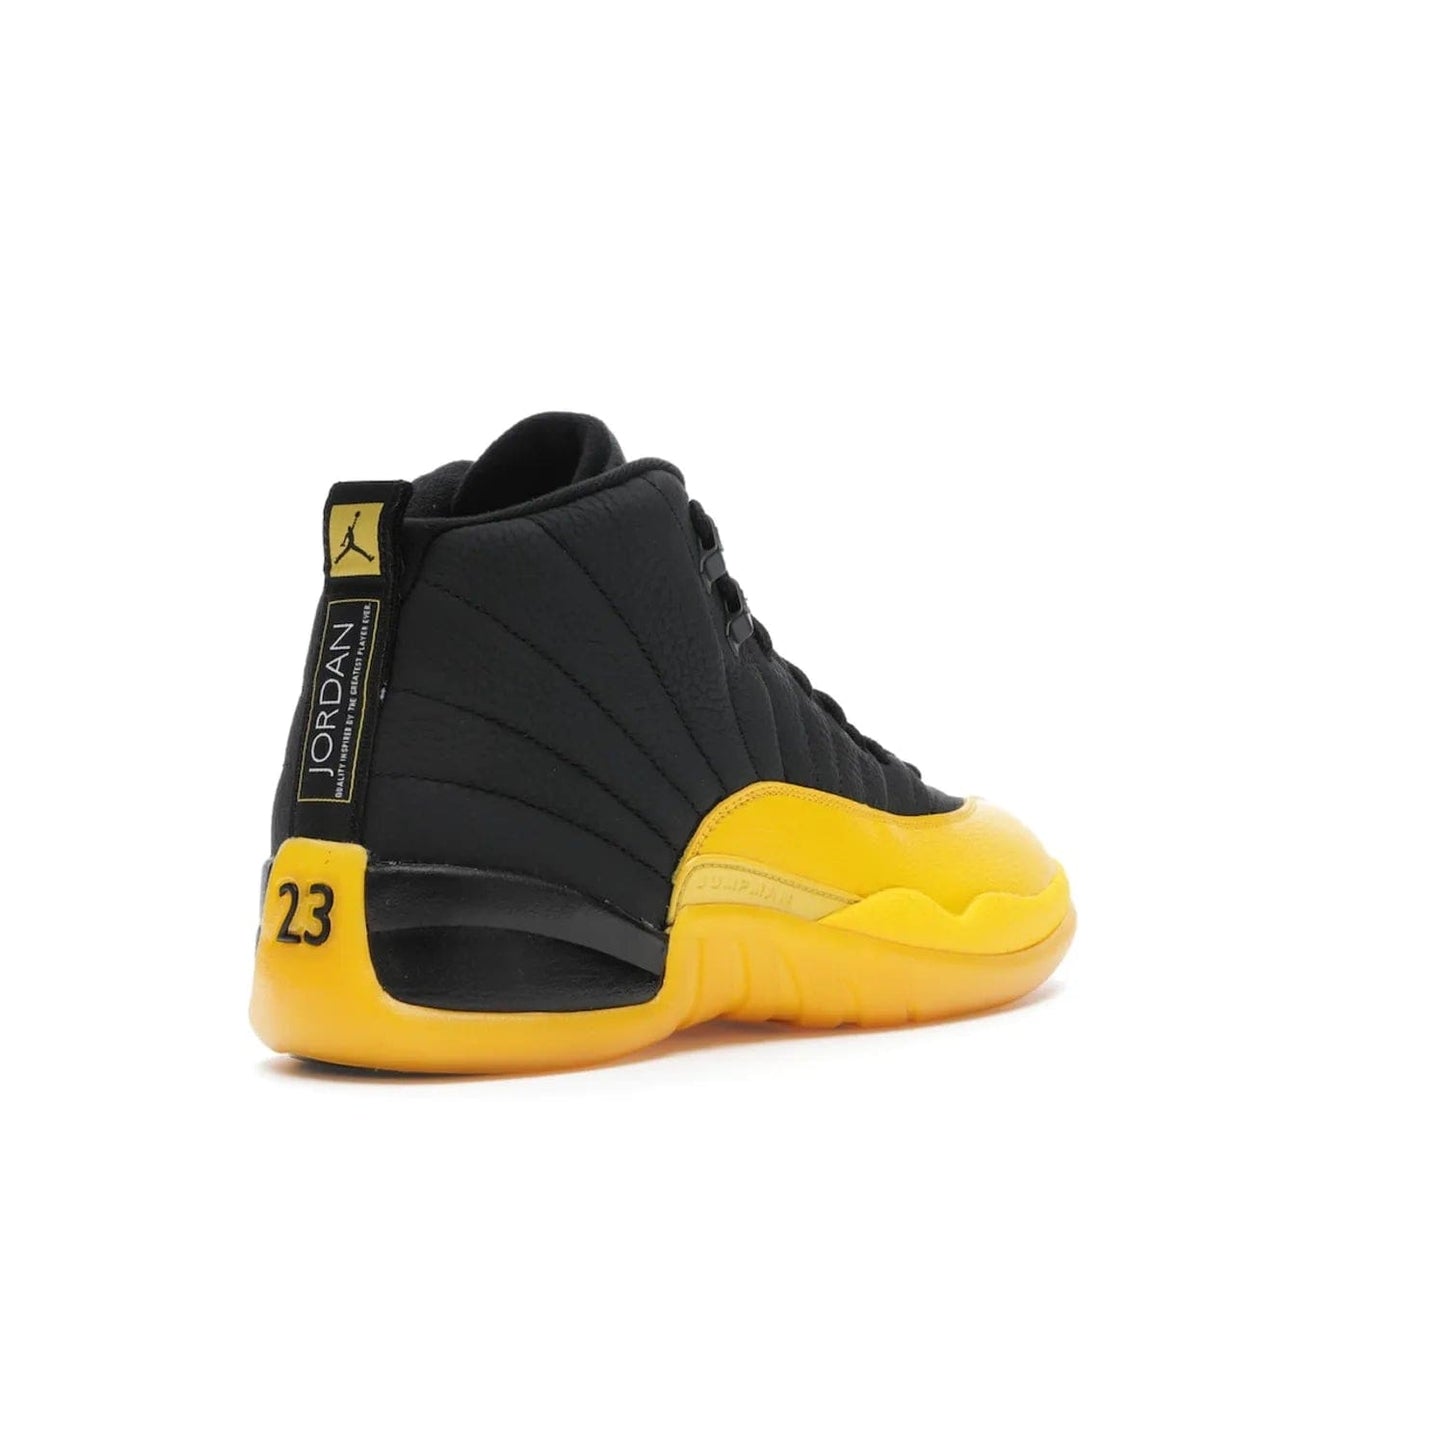 Jordan 12 Retro Black University Gold - Image 32 - Only at www.BallersClubKickz.com - This Jordan 12 Retro features a black tumbled leather upper and University Gold accents for a modern twist. Boasting Jordan "Two Three" branding and a yellow sole, these shoes will elevate your wardrobe. Fresh, sleek, and one of a kind - the Jordan 12 University Gold is your summer sneaker.